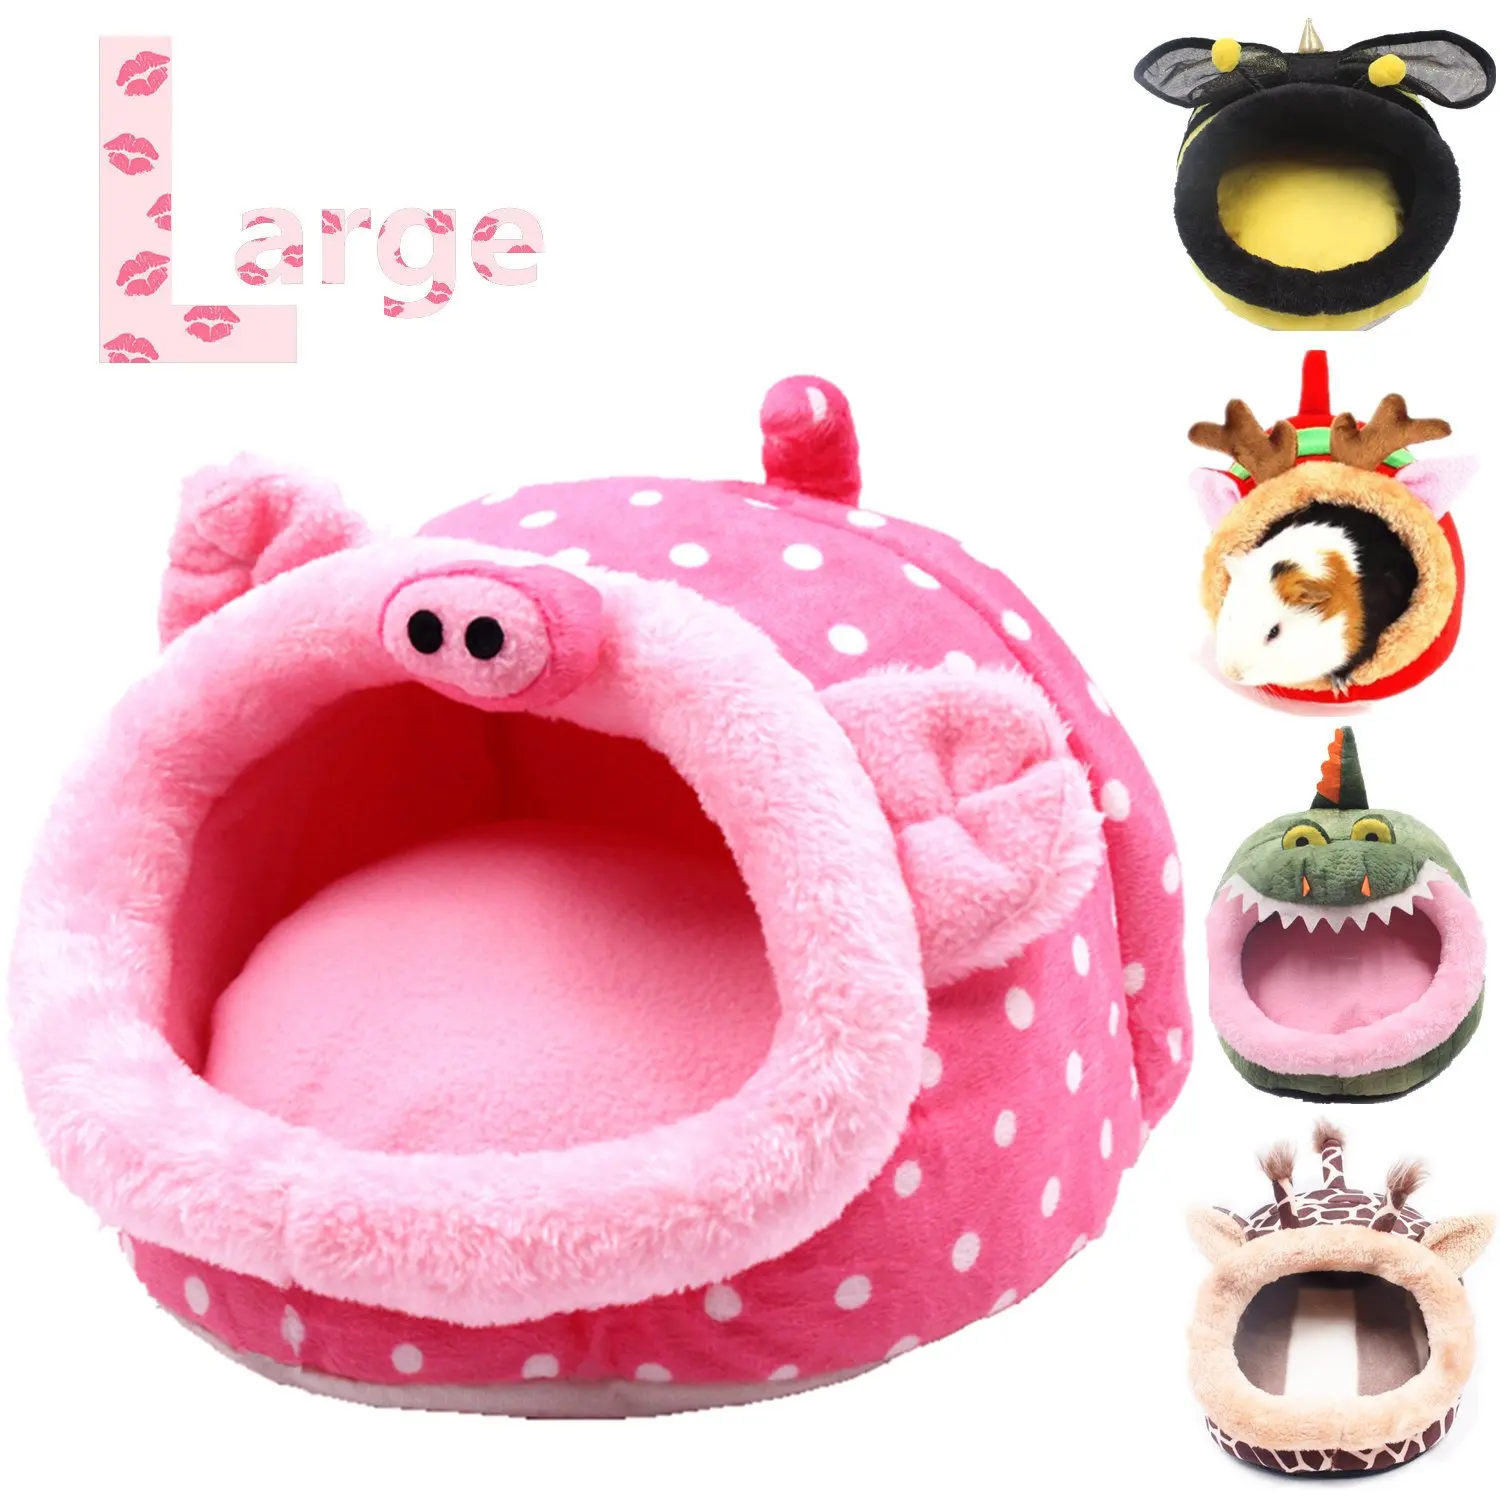 Buy Janyoo Chinchilla Hedgehog Guinea Pig Bed Accessories Cage Toys House Supplies Habitat For Ferret Rat In Cheap Price On Alibaba Com,Starbucks Calories Malaysia